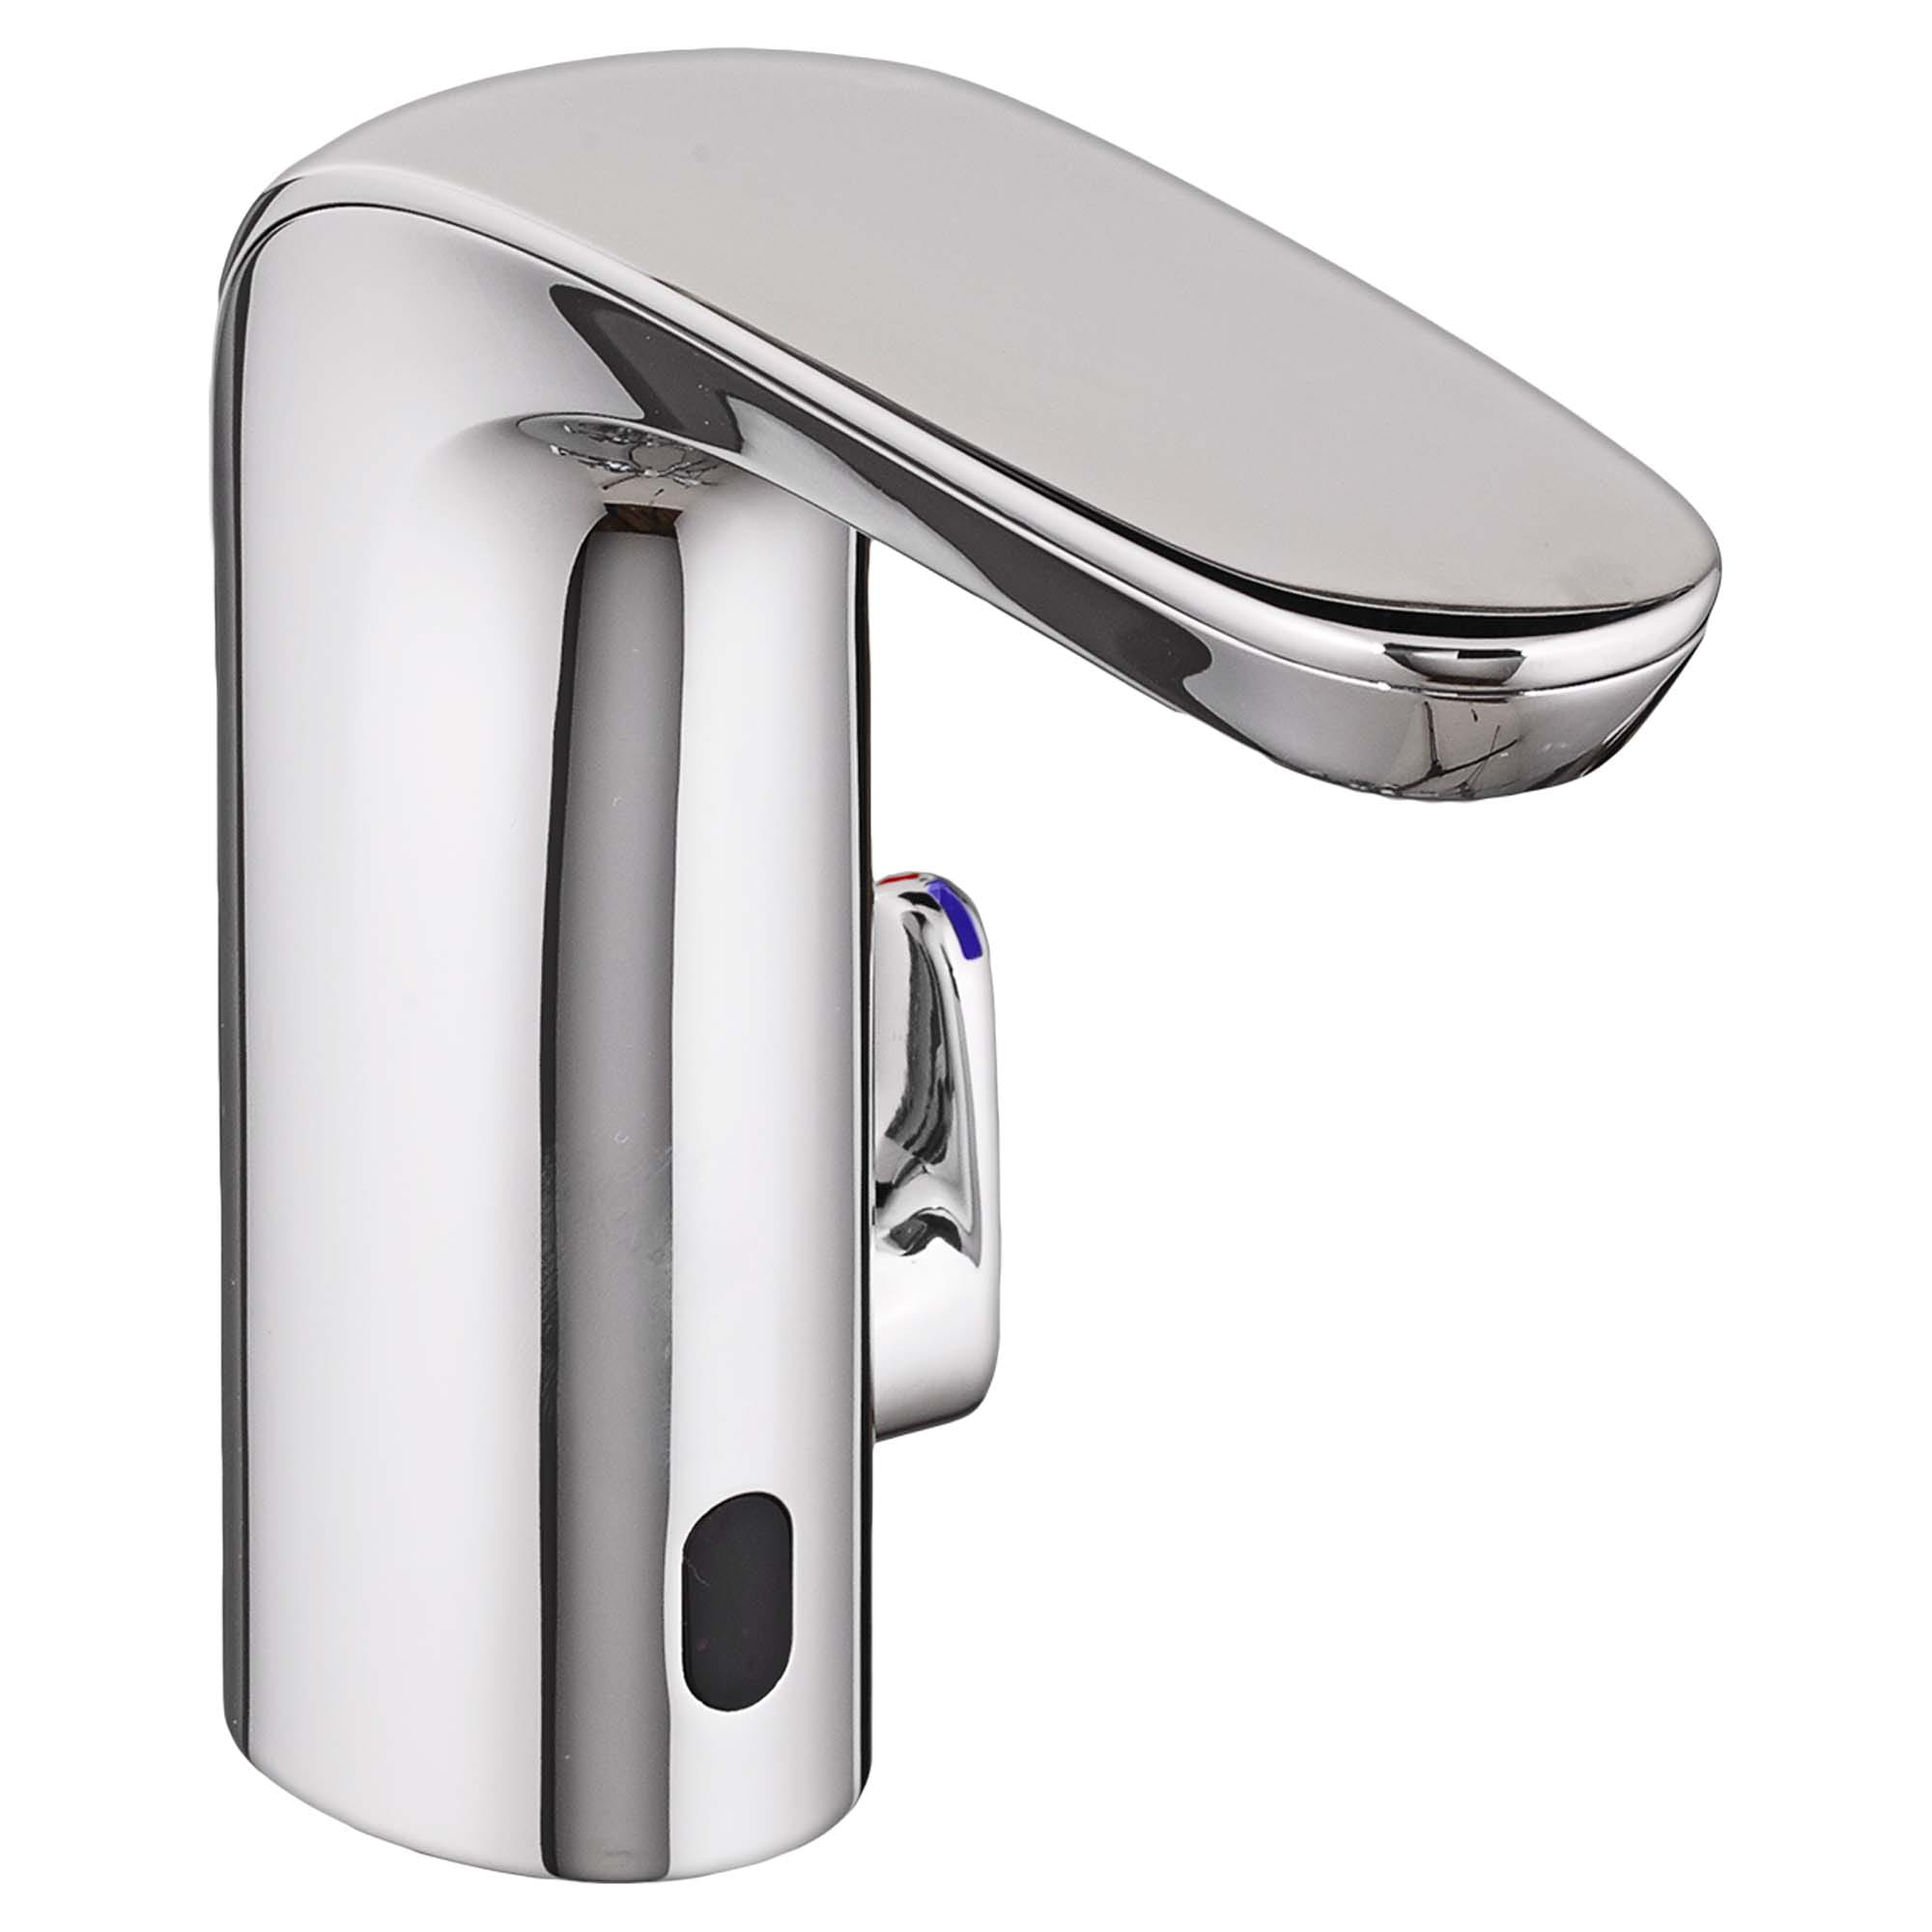 NextGen™ Selectronic® Touchless Faucet, Battery-Powered With Above-Deck Mixing, 0.35 gpm/1.3 Lpm